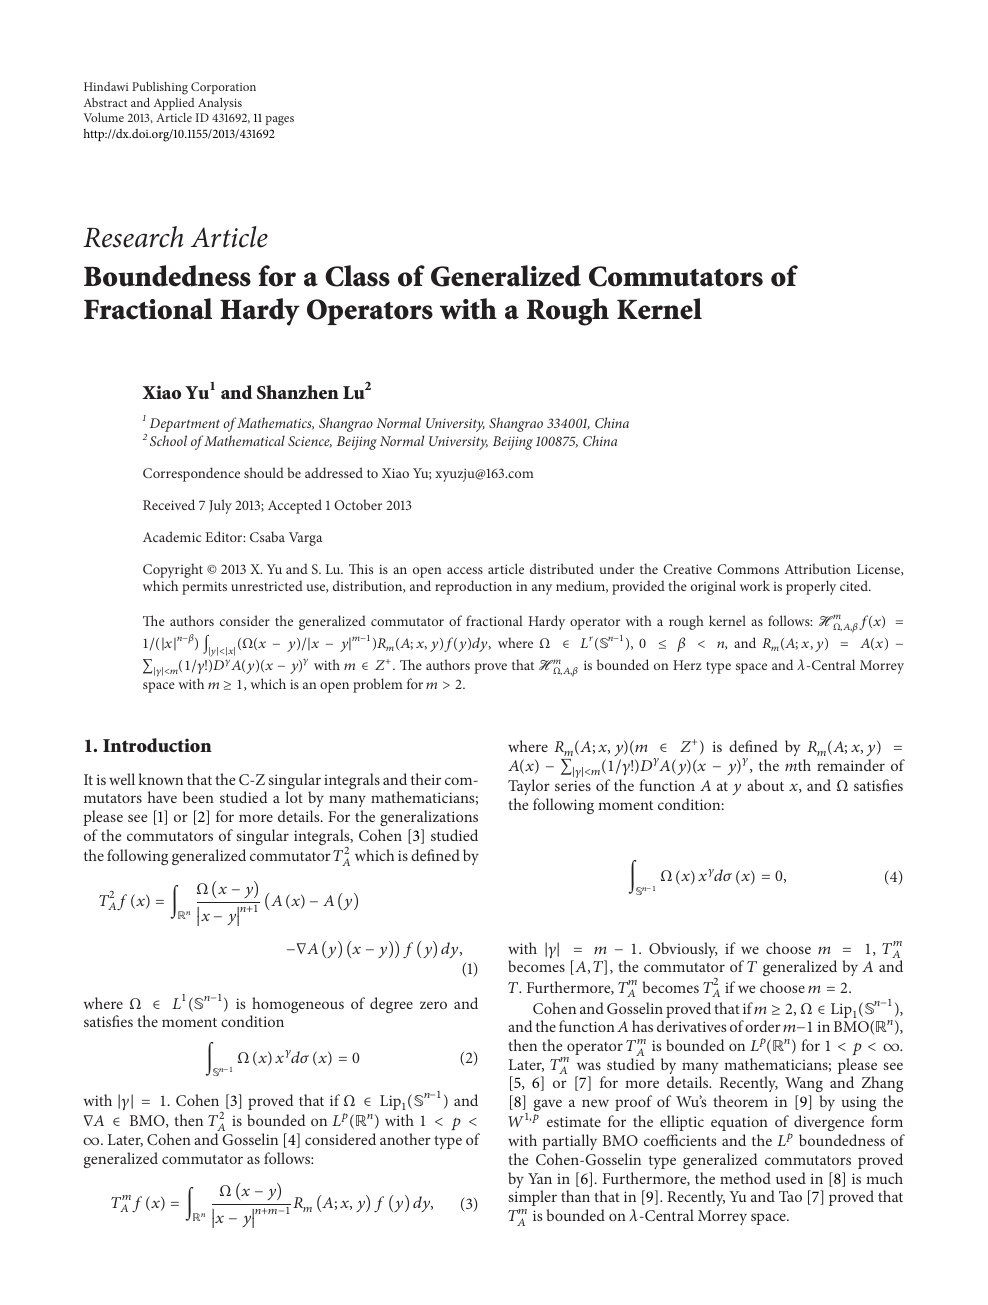 Boundedness For A Class Of Generalized Commutators Of Fractional Hardy Operators With A Rough Kernel Topic Of Research Paper In Mathematics Download Scholarly Article Pdf And Read For Free On Cyberleninka